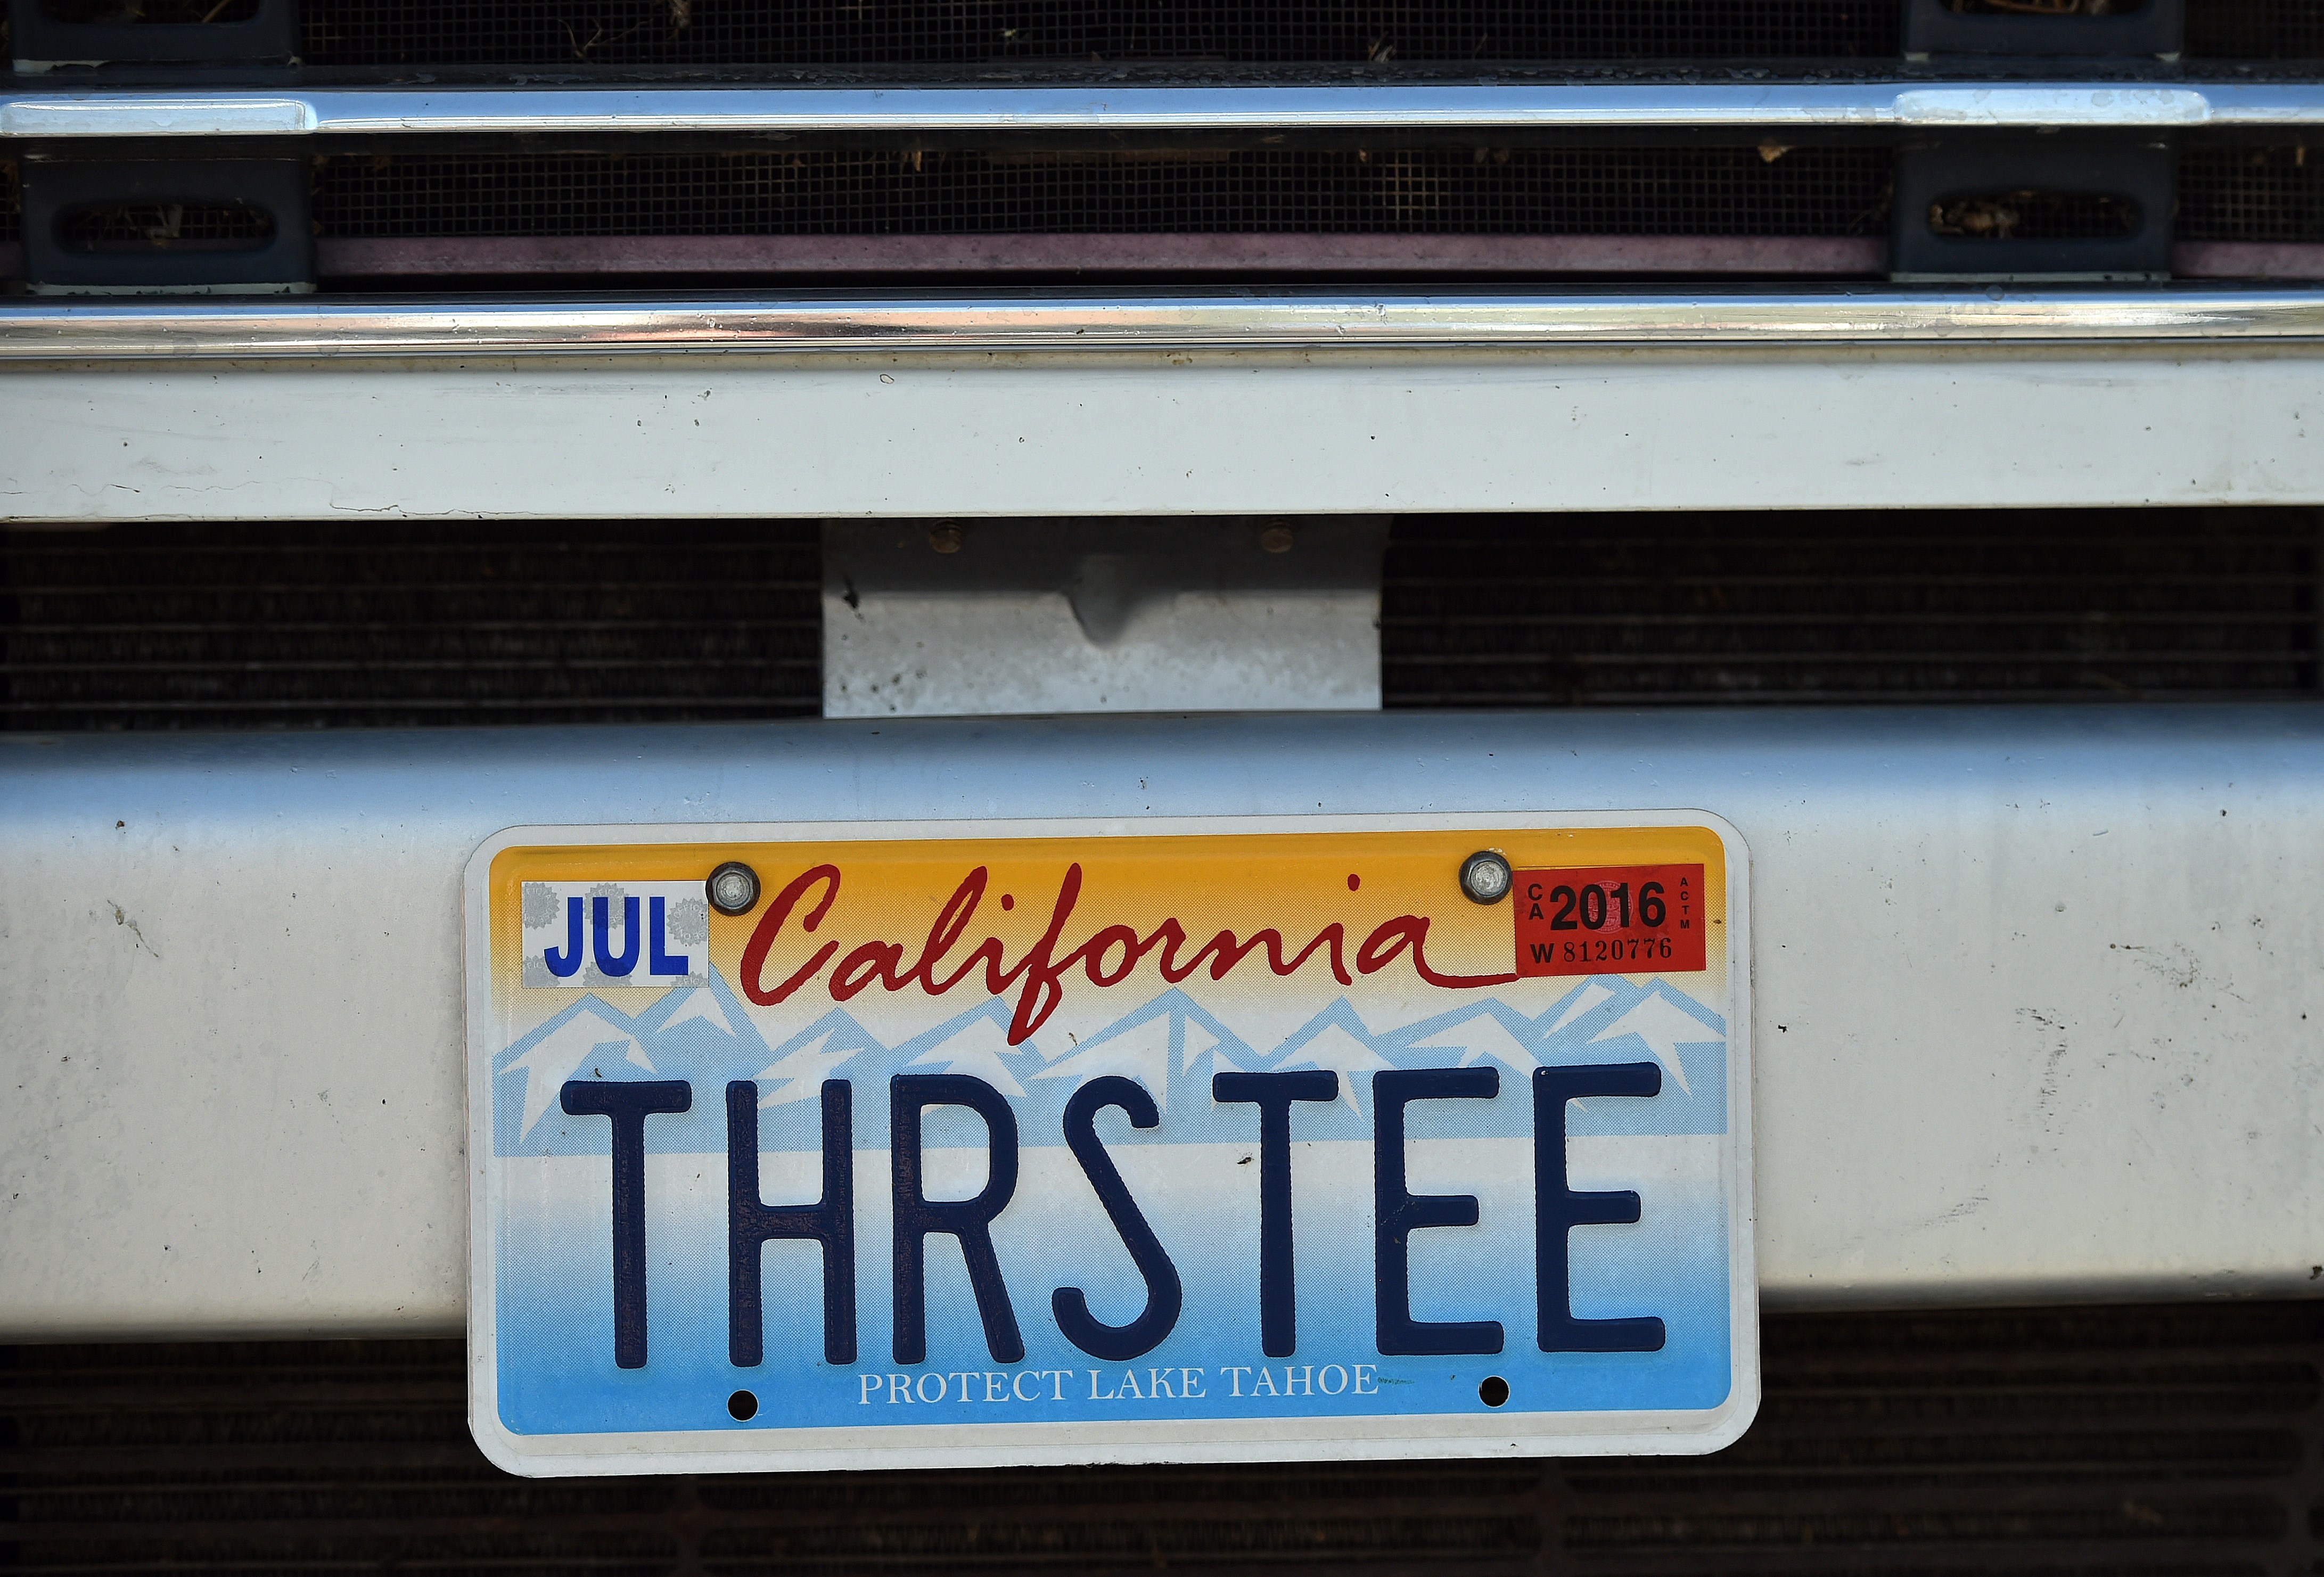 Photo of California license plate reading “THRSTEE”